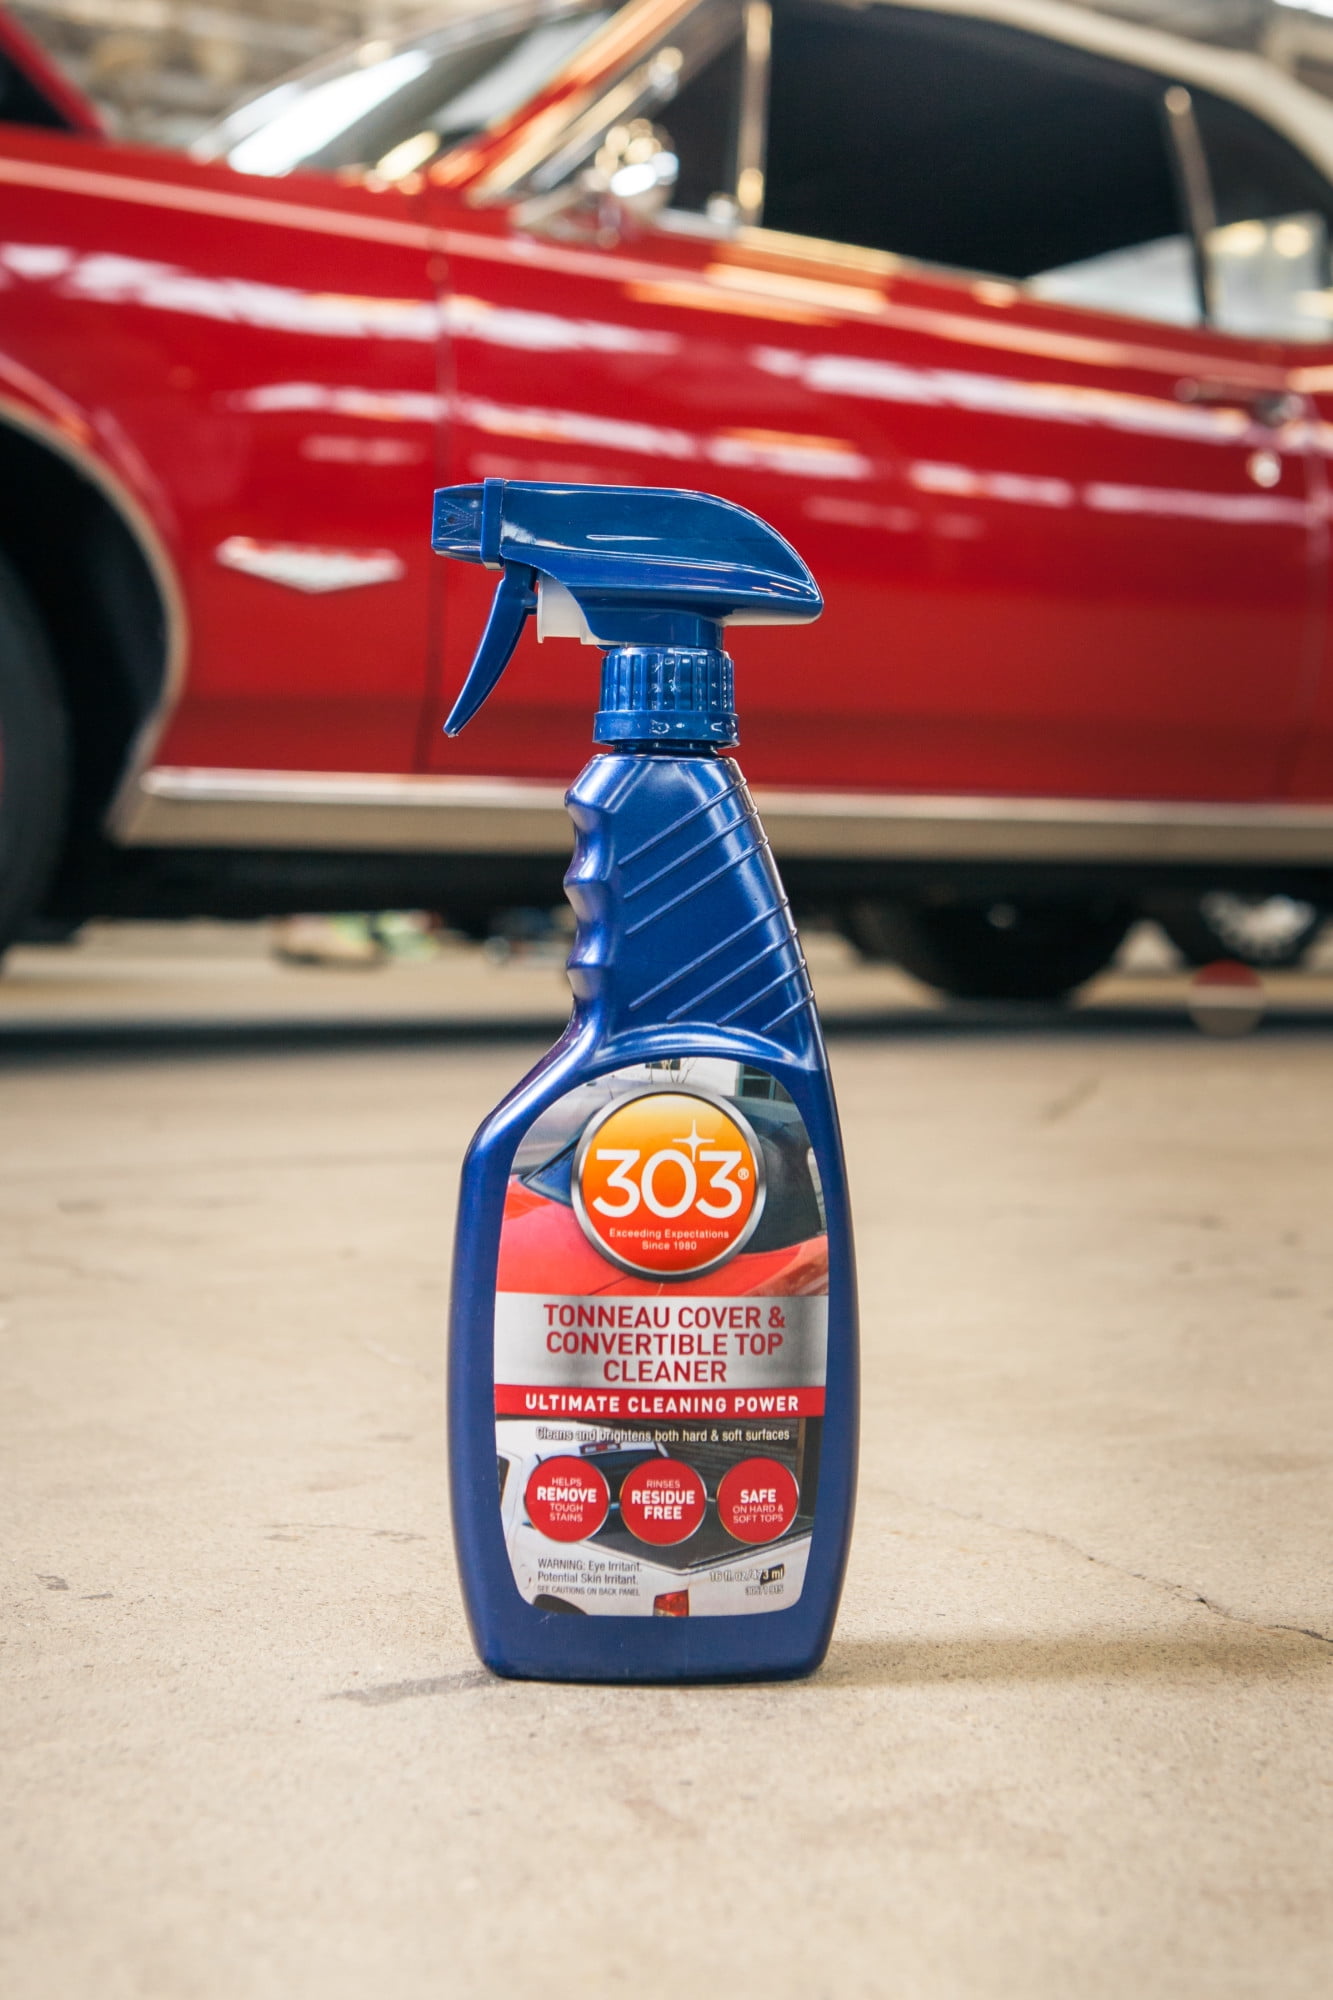 303 Convertible Fabric Top Cleaning and Care Kit - Cleans And Protects  Fabric Tops - Includes 303 Tonneau Cover And Convertible Top Cleaner 16 fl.  oz. + 303 Fabric Guard 16 fl. oz., (30520)